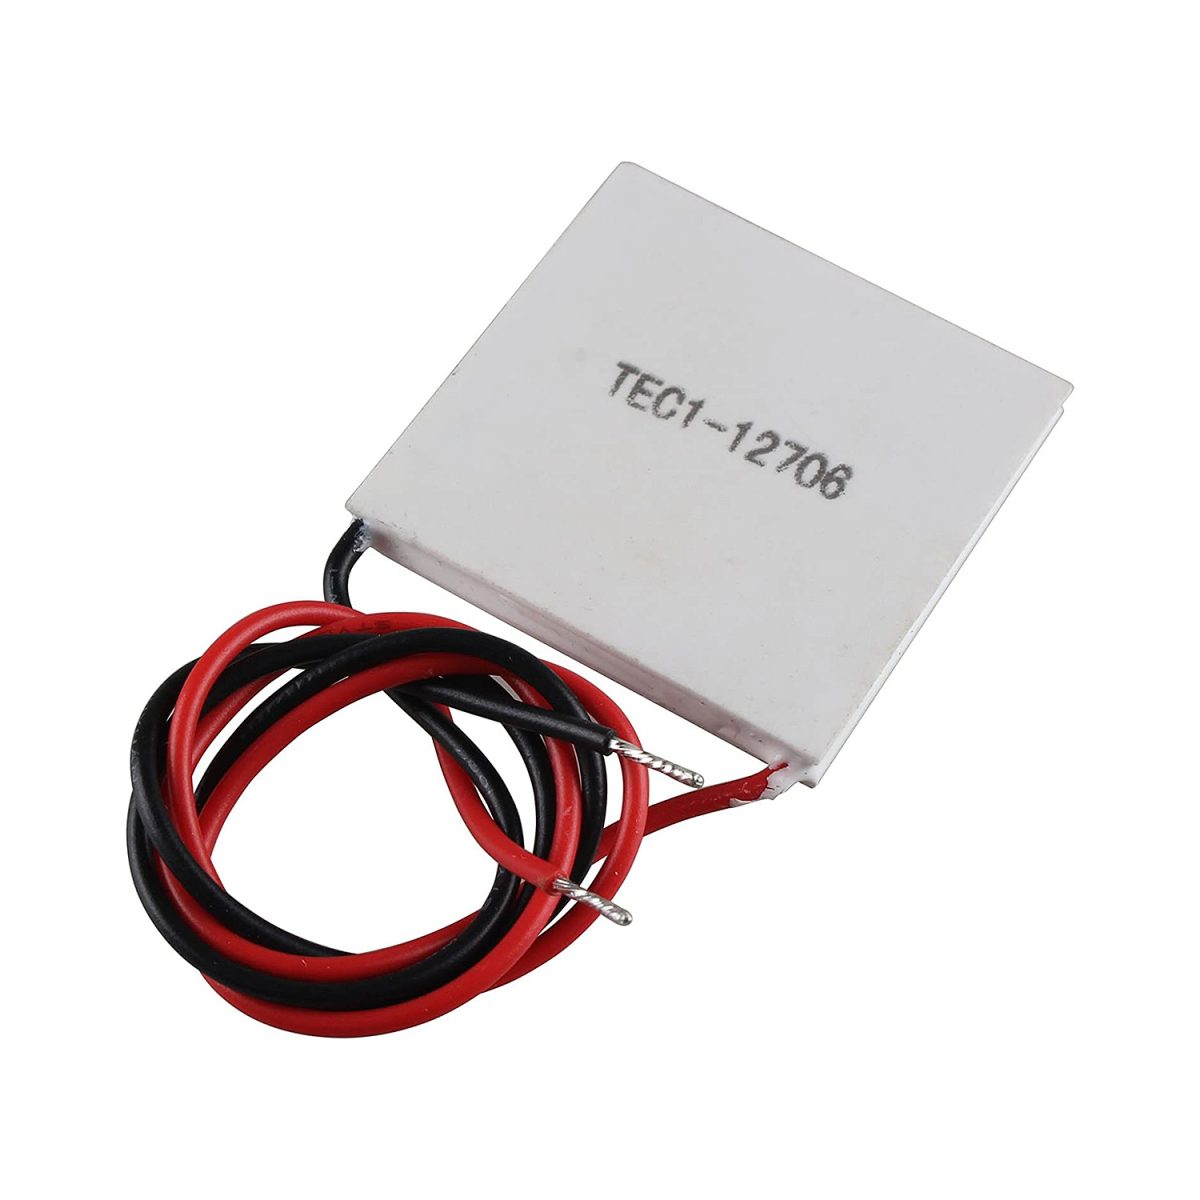 Peltier 12V 6A 60W TEC1-12706 Thermoelectric Cooler